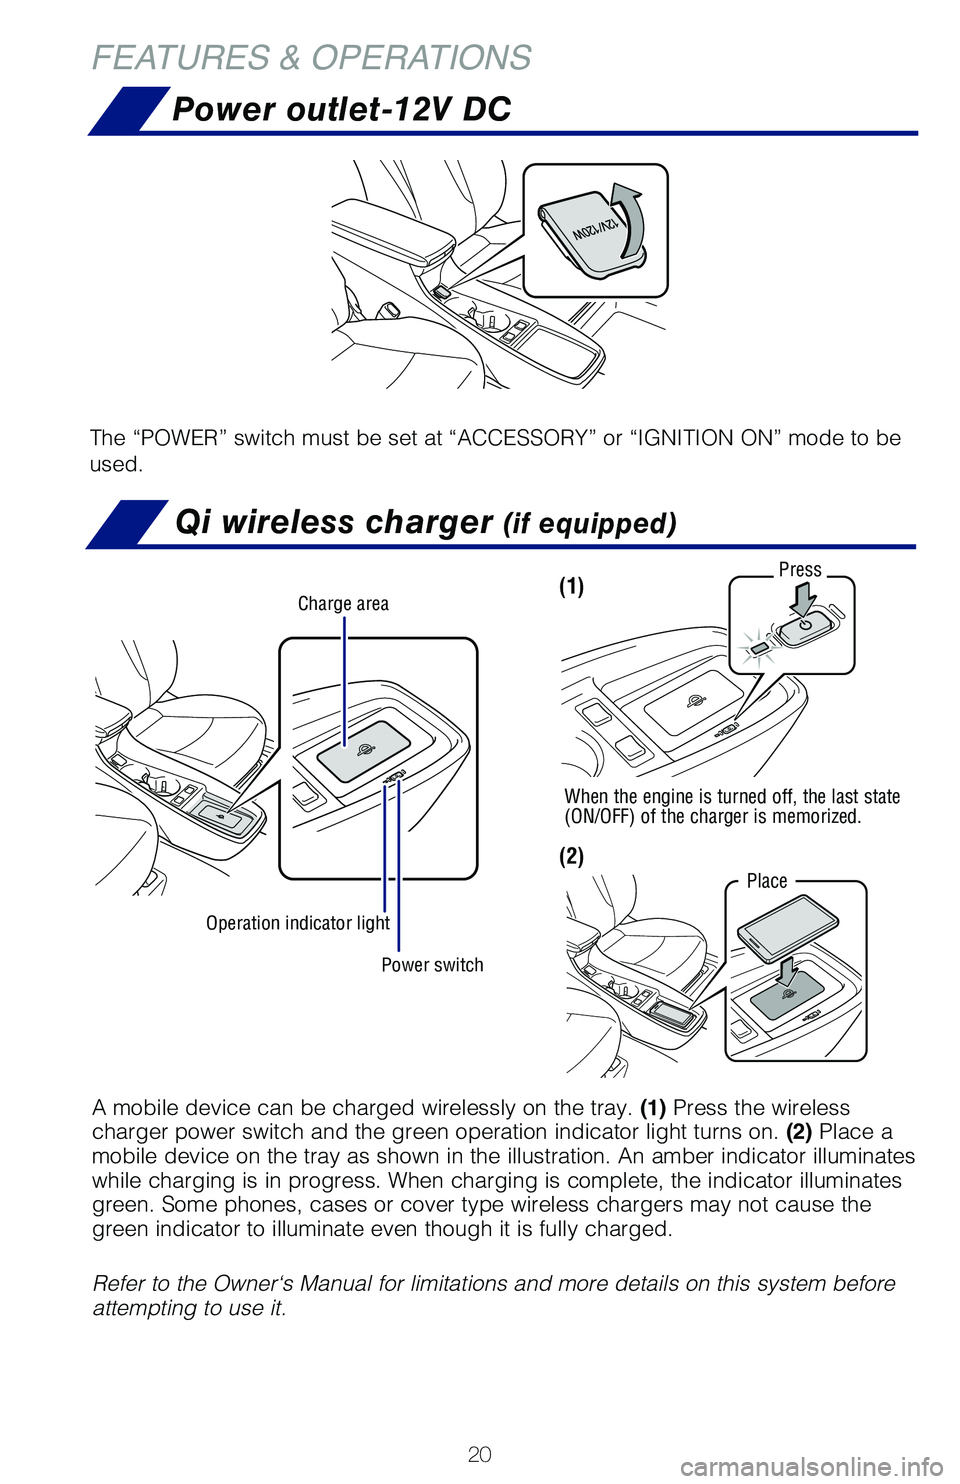 TOYOTA PRIUS 2019  Owners Manual (in English) 20
FEATURES & OPERATIONS
Qi wireless charger (if equipped)
Power outlet-12V DC
The “POWER” switch must be set at “ACCESSORY” or “IGNITION ON” mode to be 
used.
Power switch
Charge area
Ope